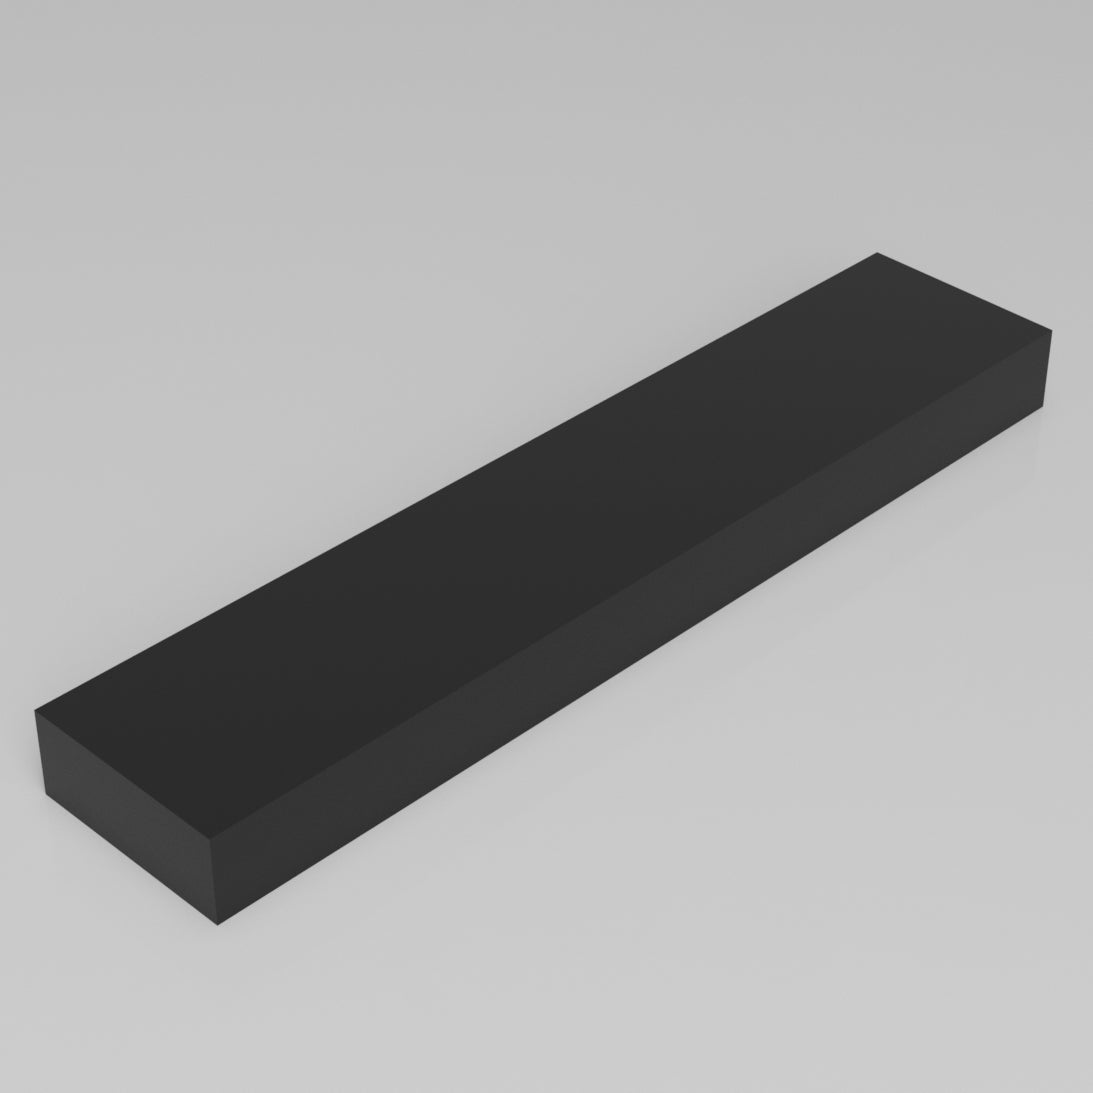 Machinable Wax Rectangular Block Front View 2 Inch by 5 Inch by 24 Inch